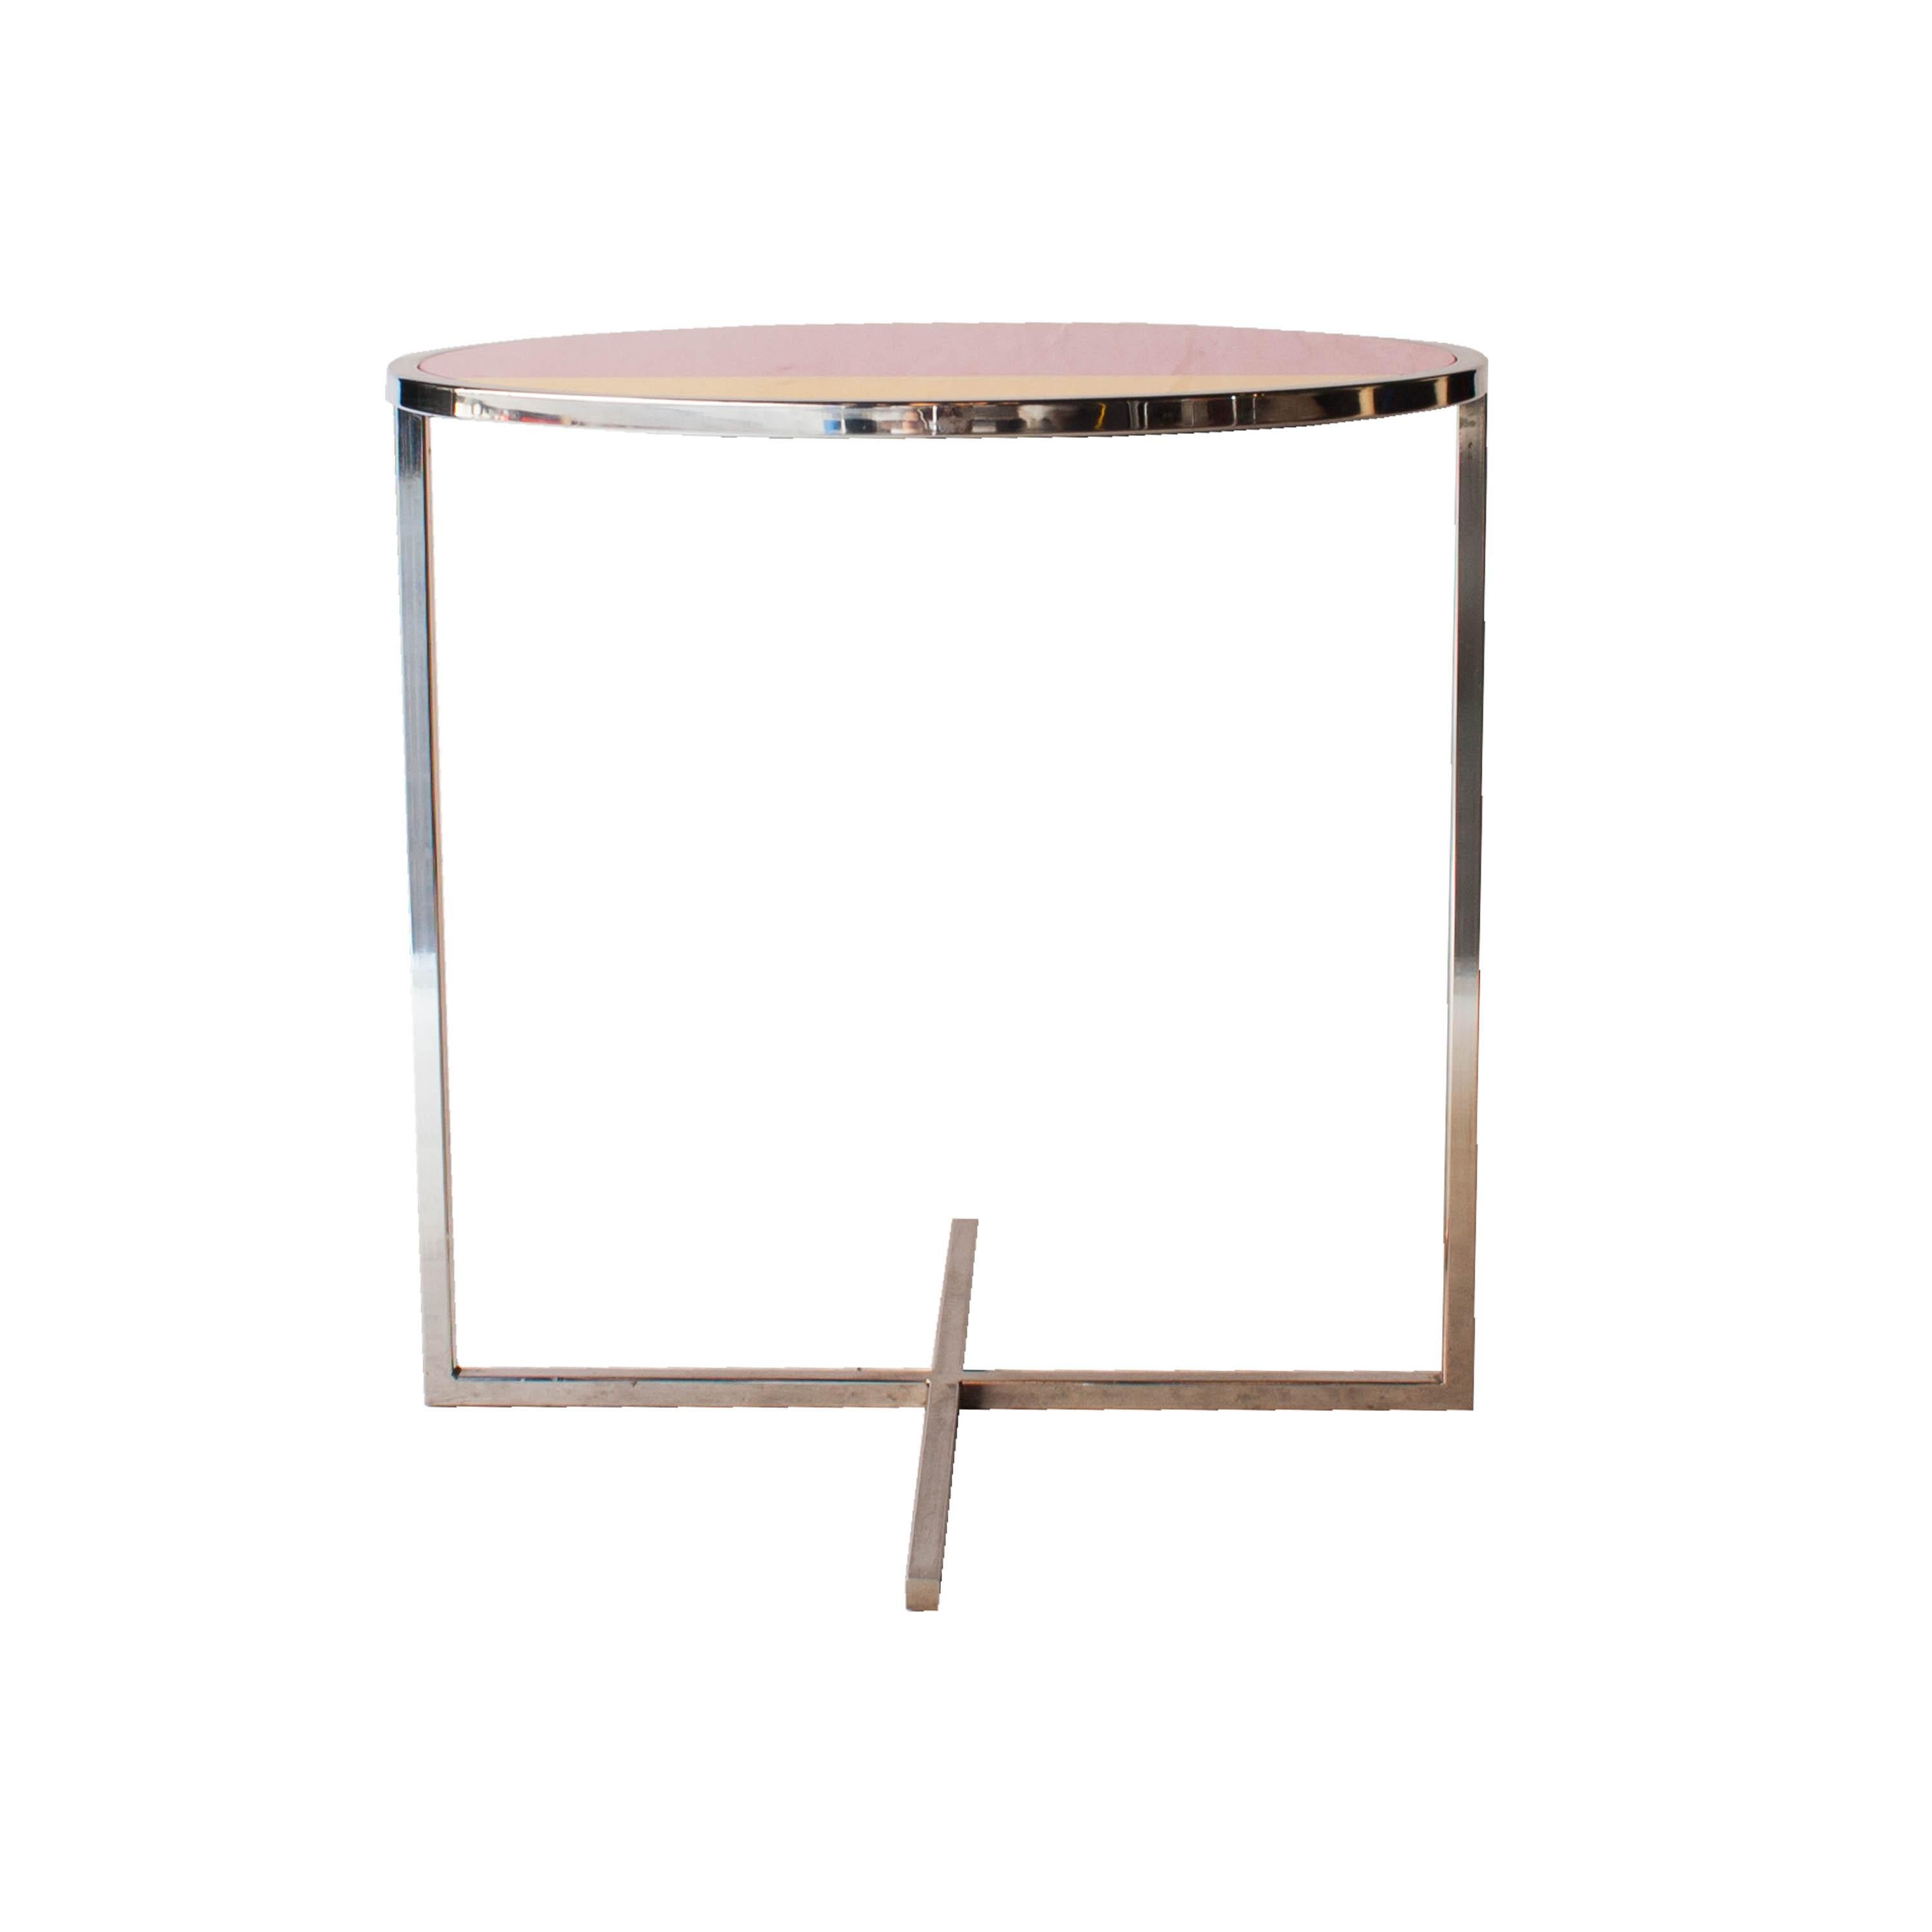 IKB 191 Contemporary Circular Chrome Glass Pink Blue Center Table, Spain, 2019 1